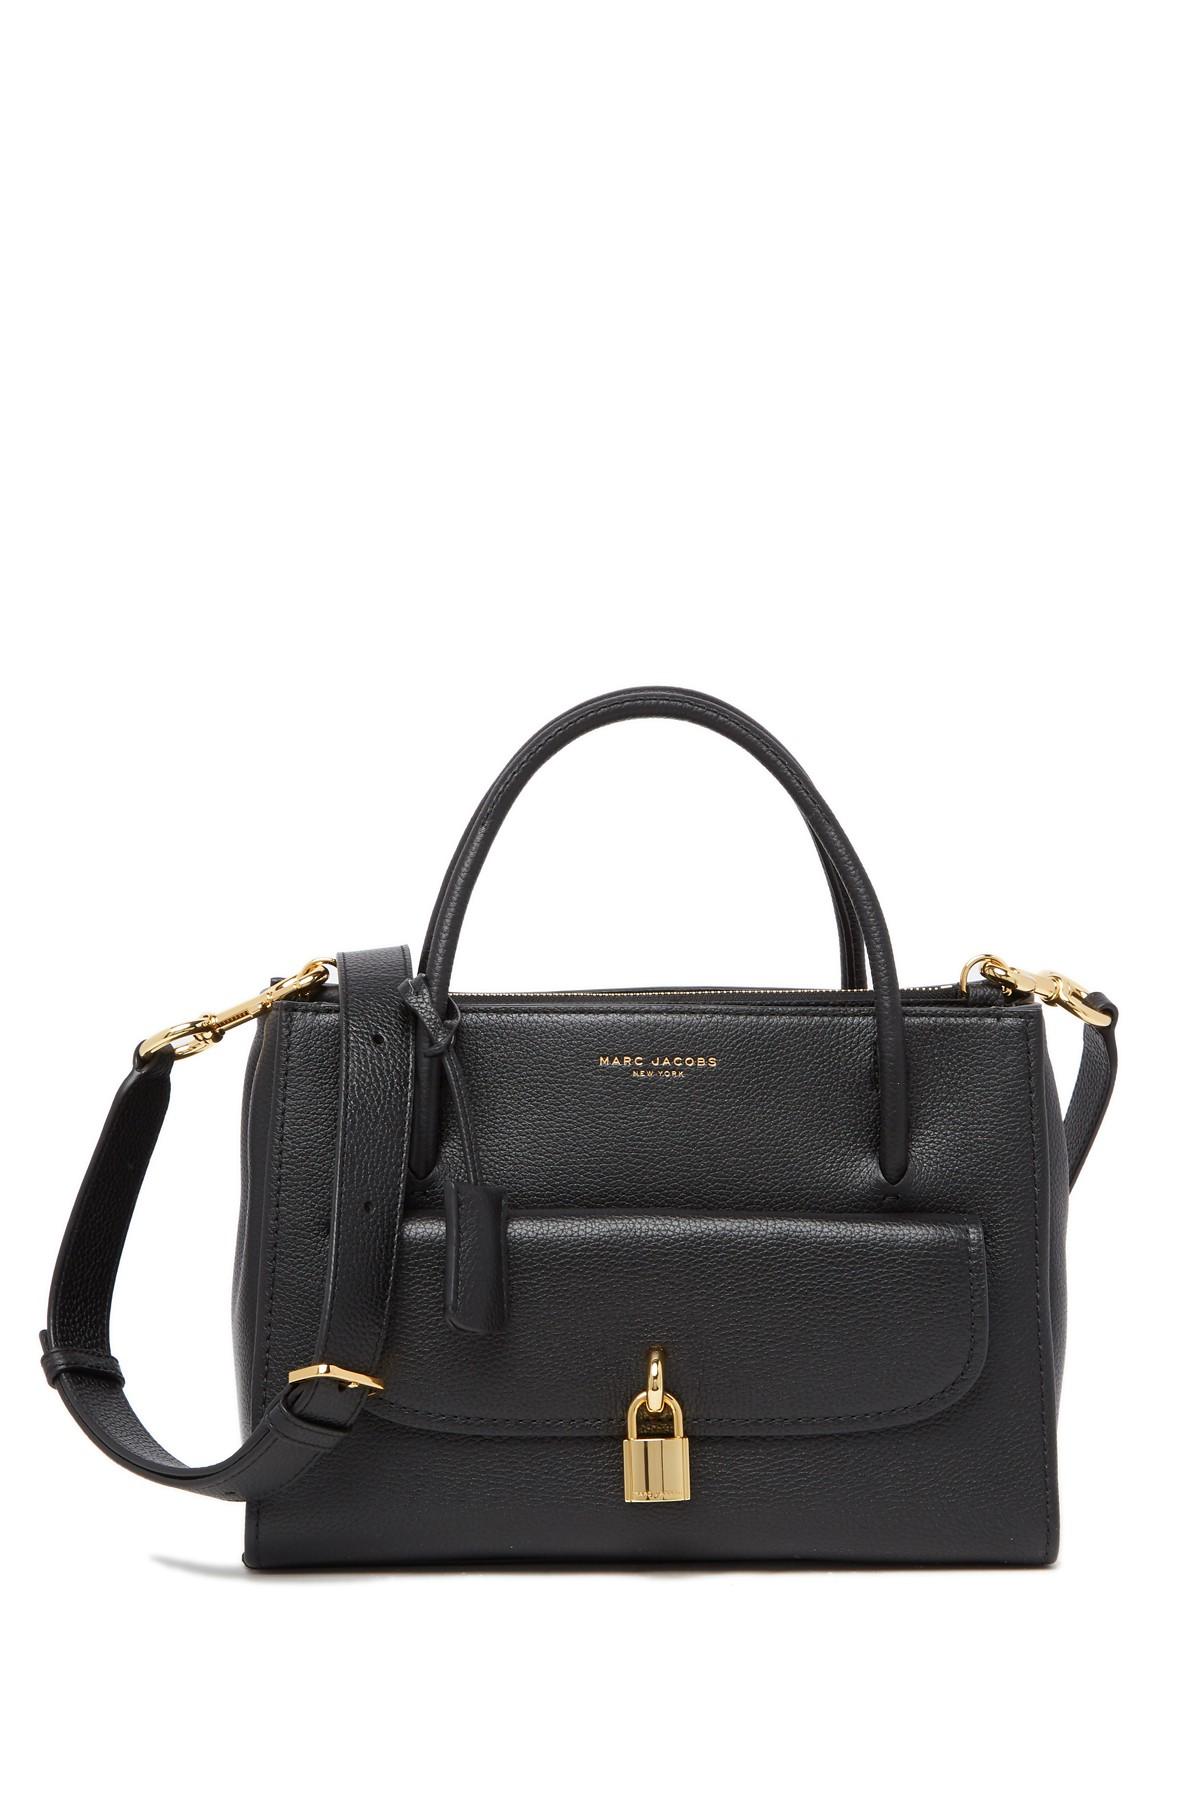 Marc Jacobs Lock That Leather Tote Bag in Black | Lyst